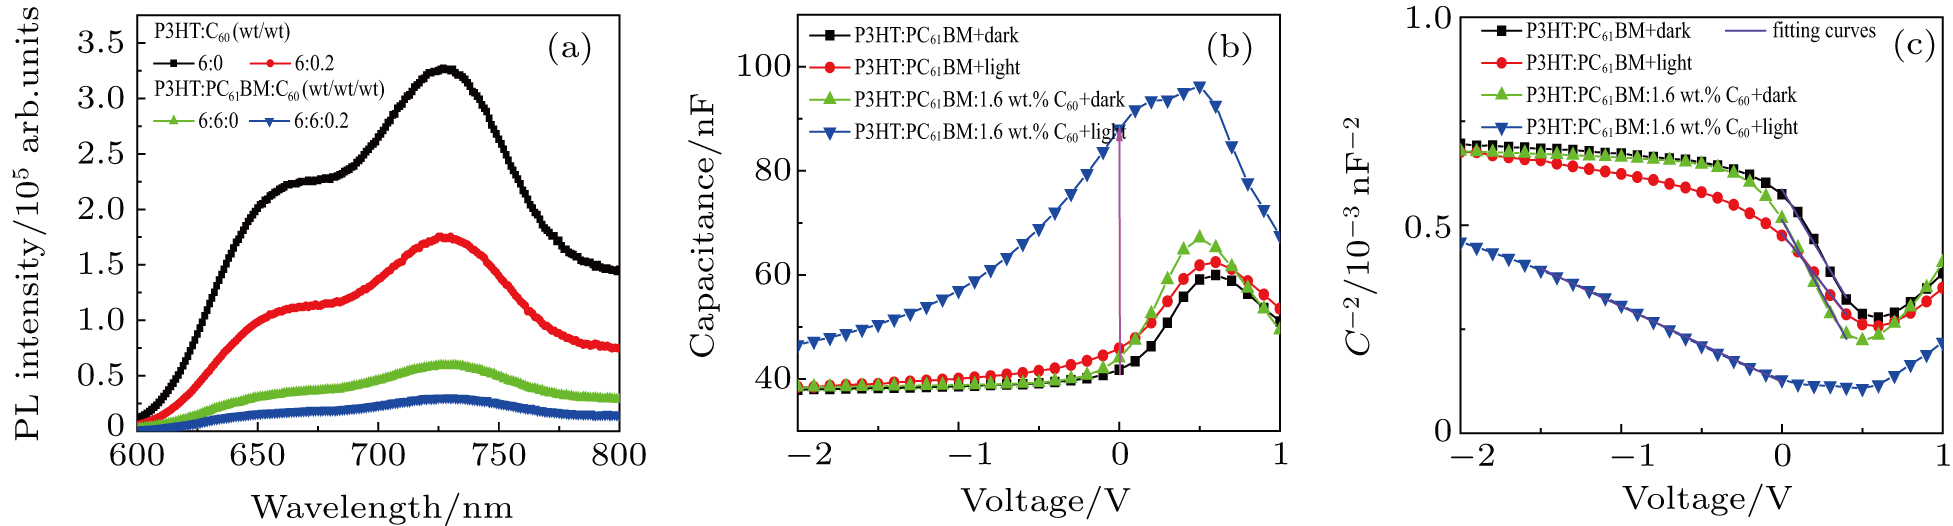 Realizing Photomultiplication Type Organic Photodetectors Based On C Sub 60 Sub Doped Bulk Heterojunction Structure At Low Bias Xref Rid Cpb 28 3 fn1 Ref Type Fn Xref Fn Id Cpb 28 3 fn1 Label Label P Project Supported By